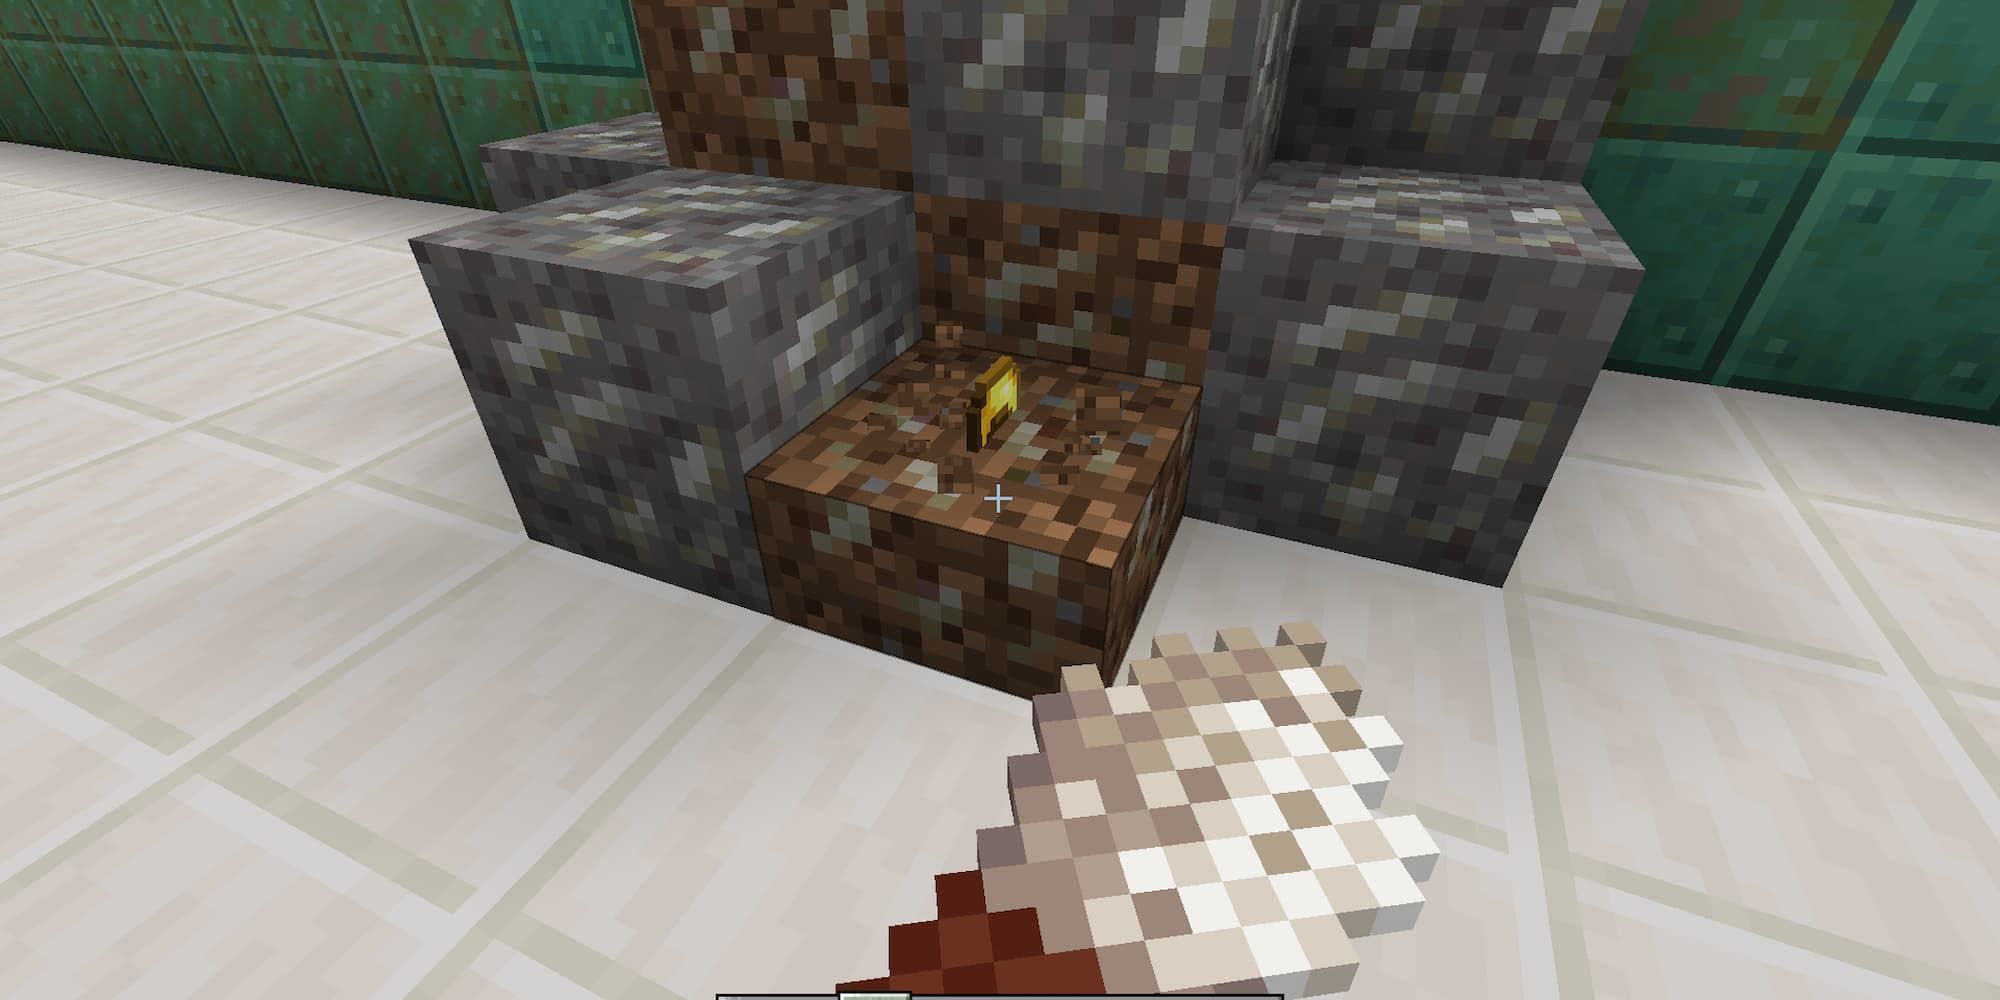 A player has used a brush on a dirt block in Minecraft to uncover something golden.